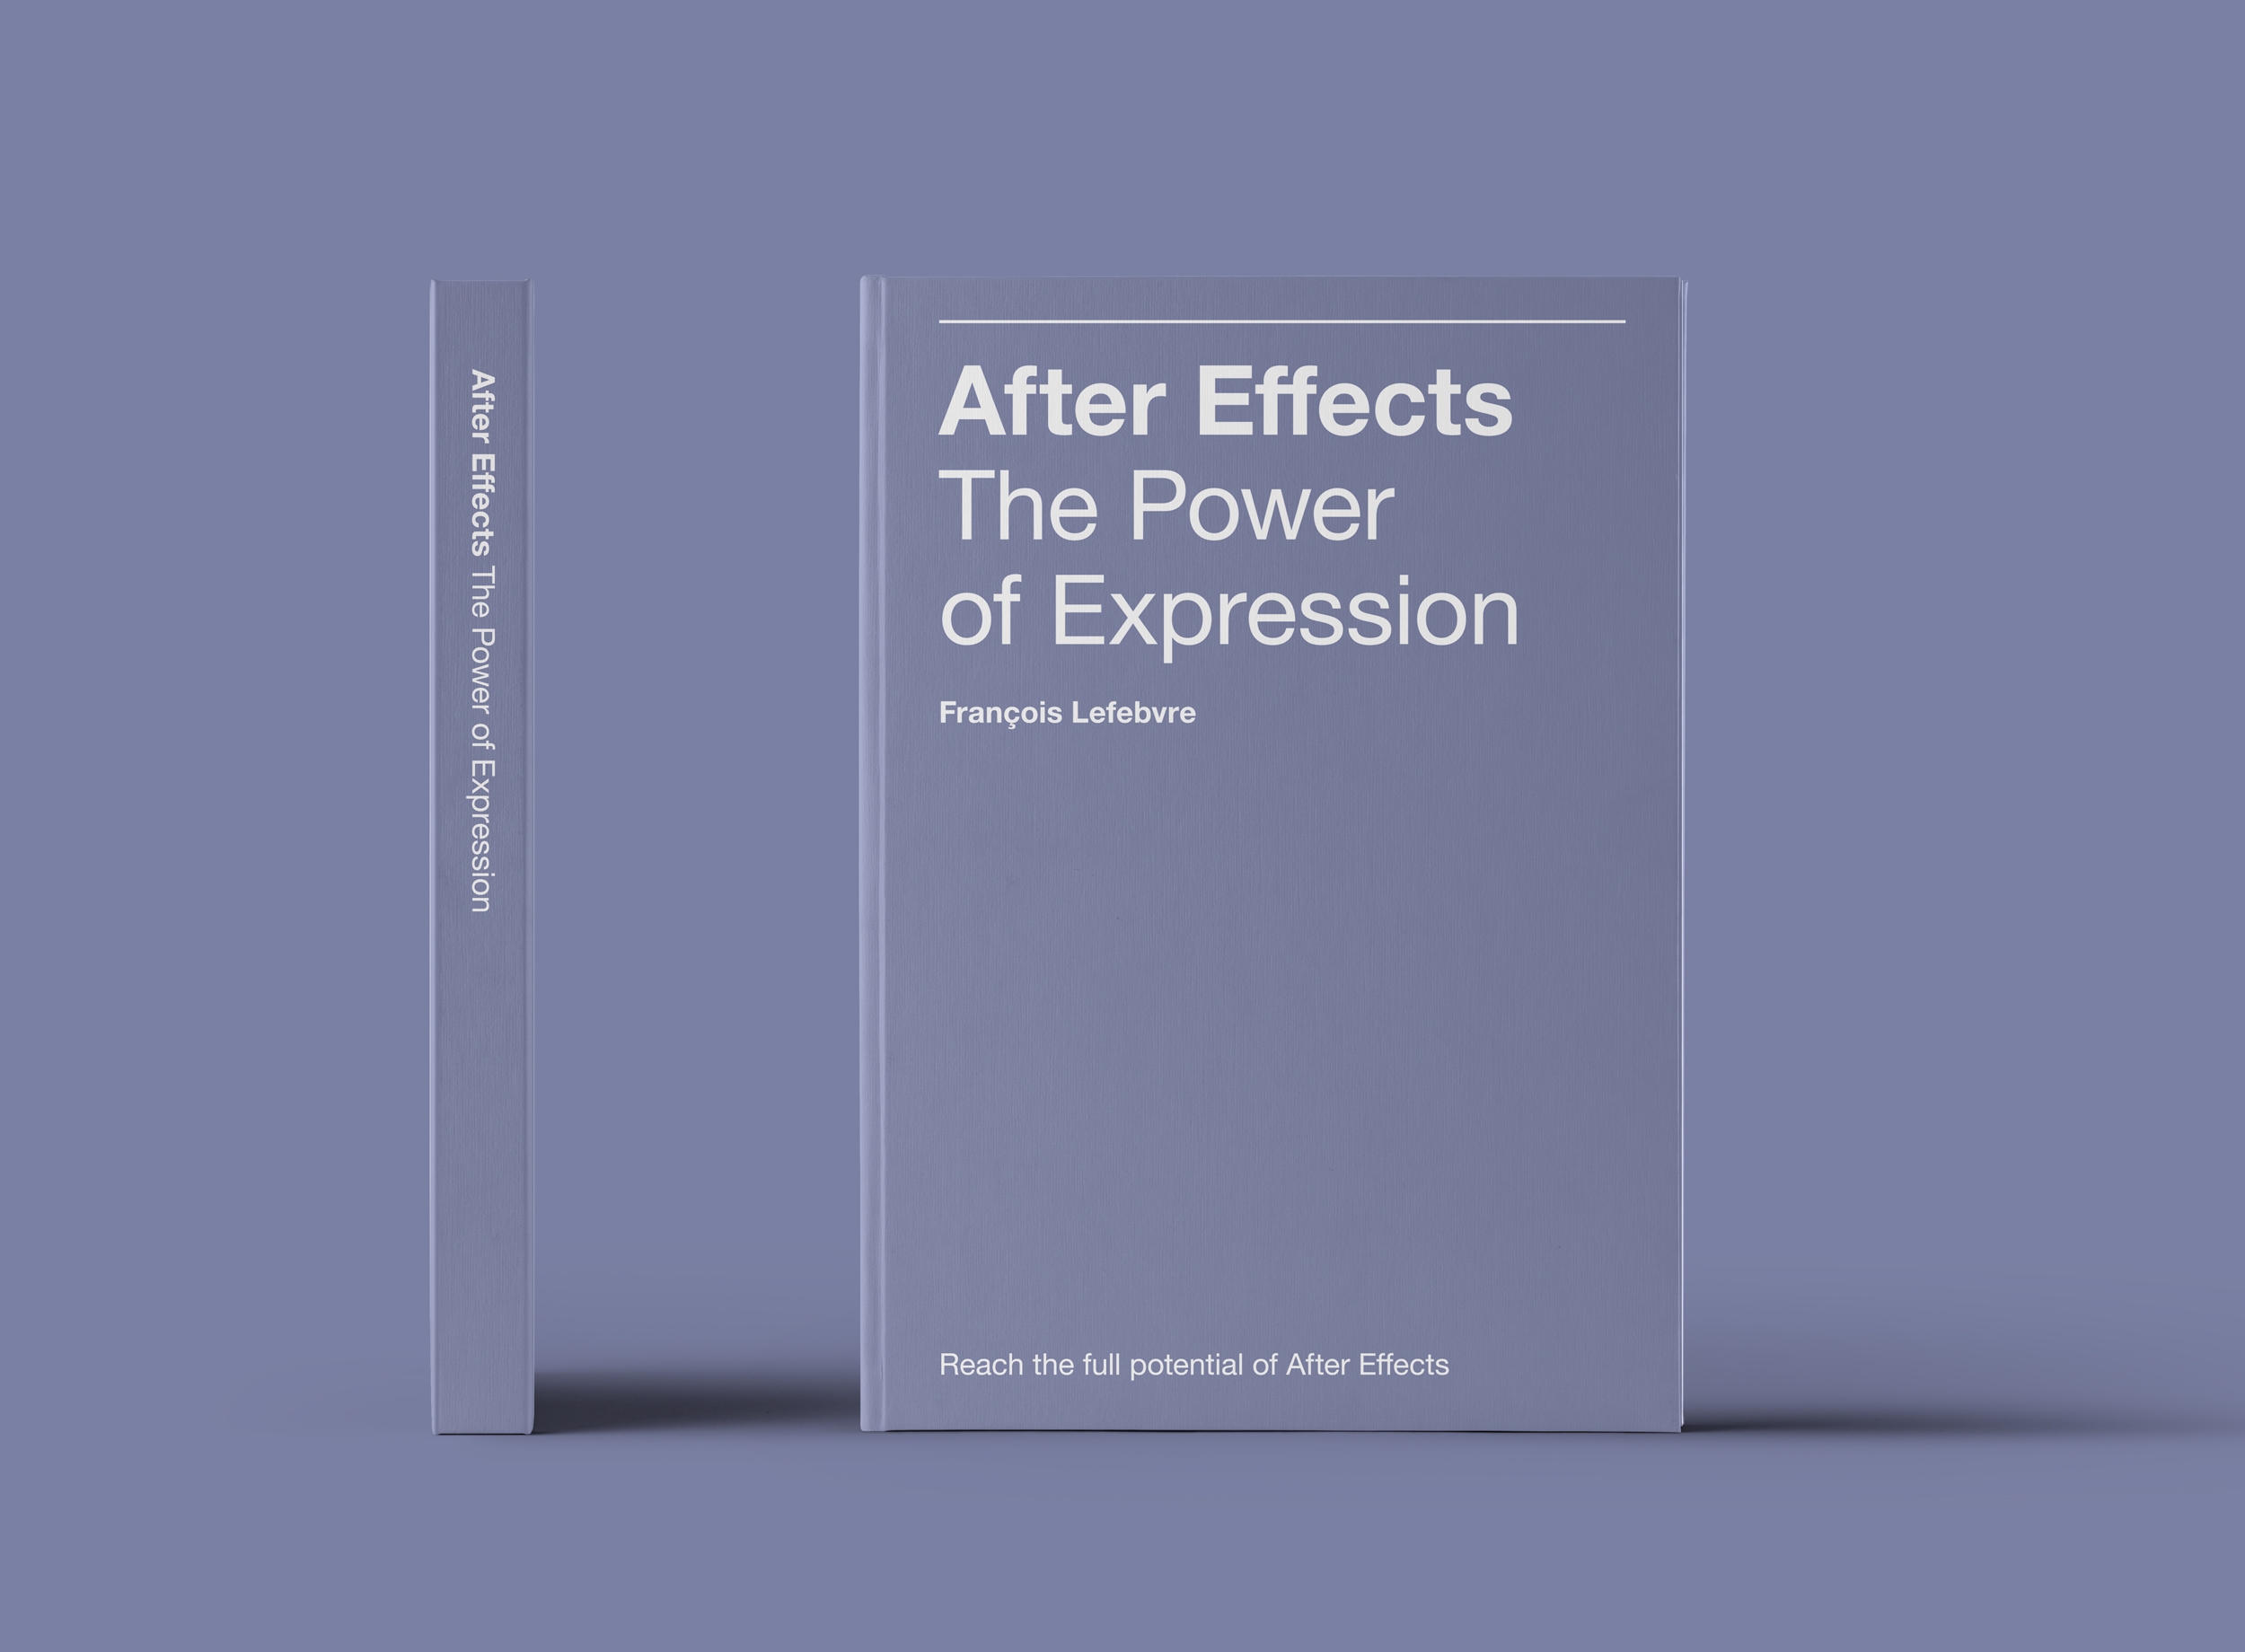 Power of expression the book